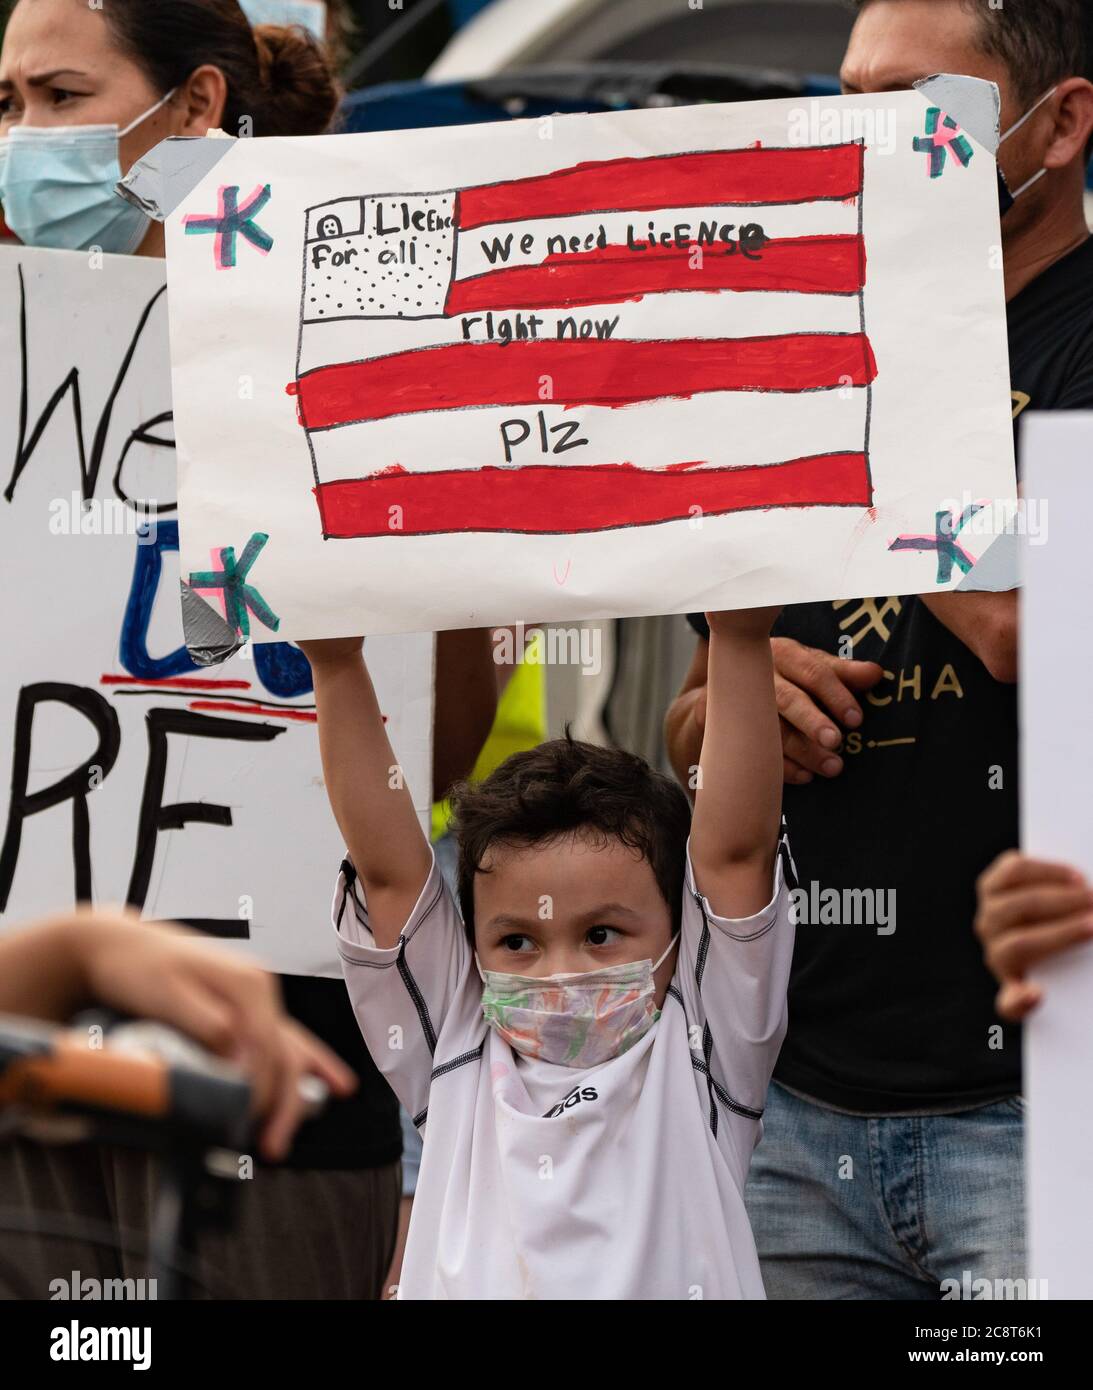 July 26, 2020, Boston, Massachusetts, USA: A child holds a sign 'we need license right now plz' during a rally with Black Lives Matter rally in front of Massachusetts Statehouse where immigration activists have been camping out to advocate driver's licenses for all qualified Massachusetts residences regardless of immigration status, for 11 days. Credit: Keiko Hiromi/AFLO/Alamy Live News Stock Photo